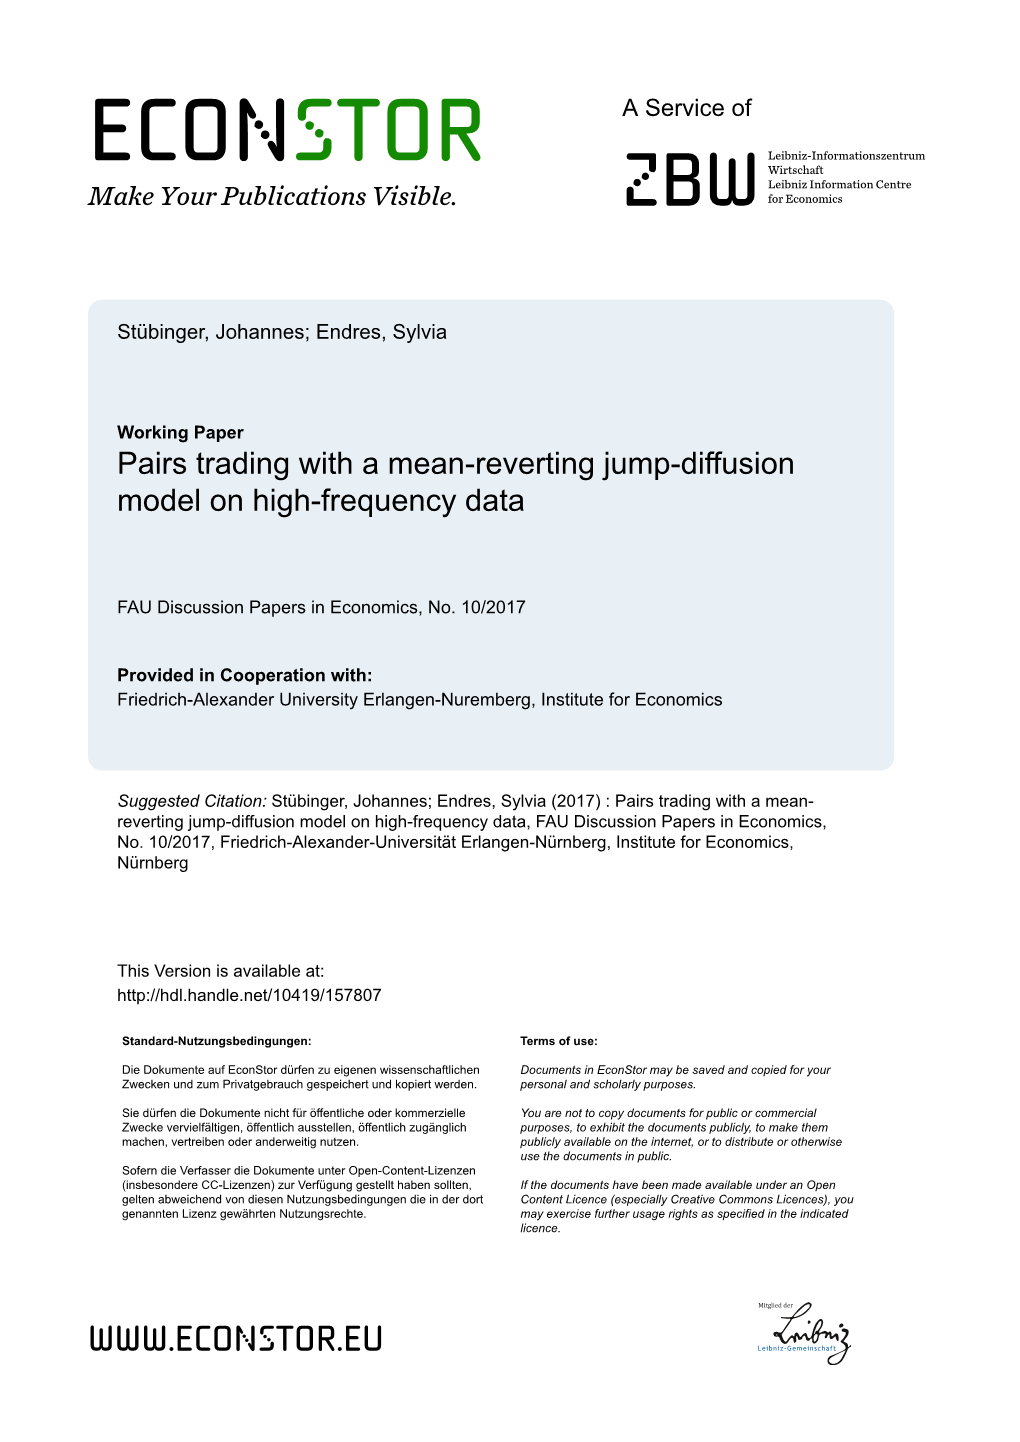 Pairs Trading with a Mean-Reverting Jump-Diffusion Model on High-Frequency Data